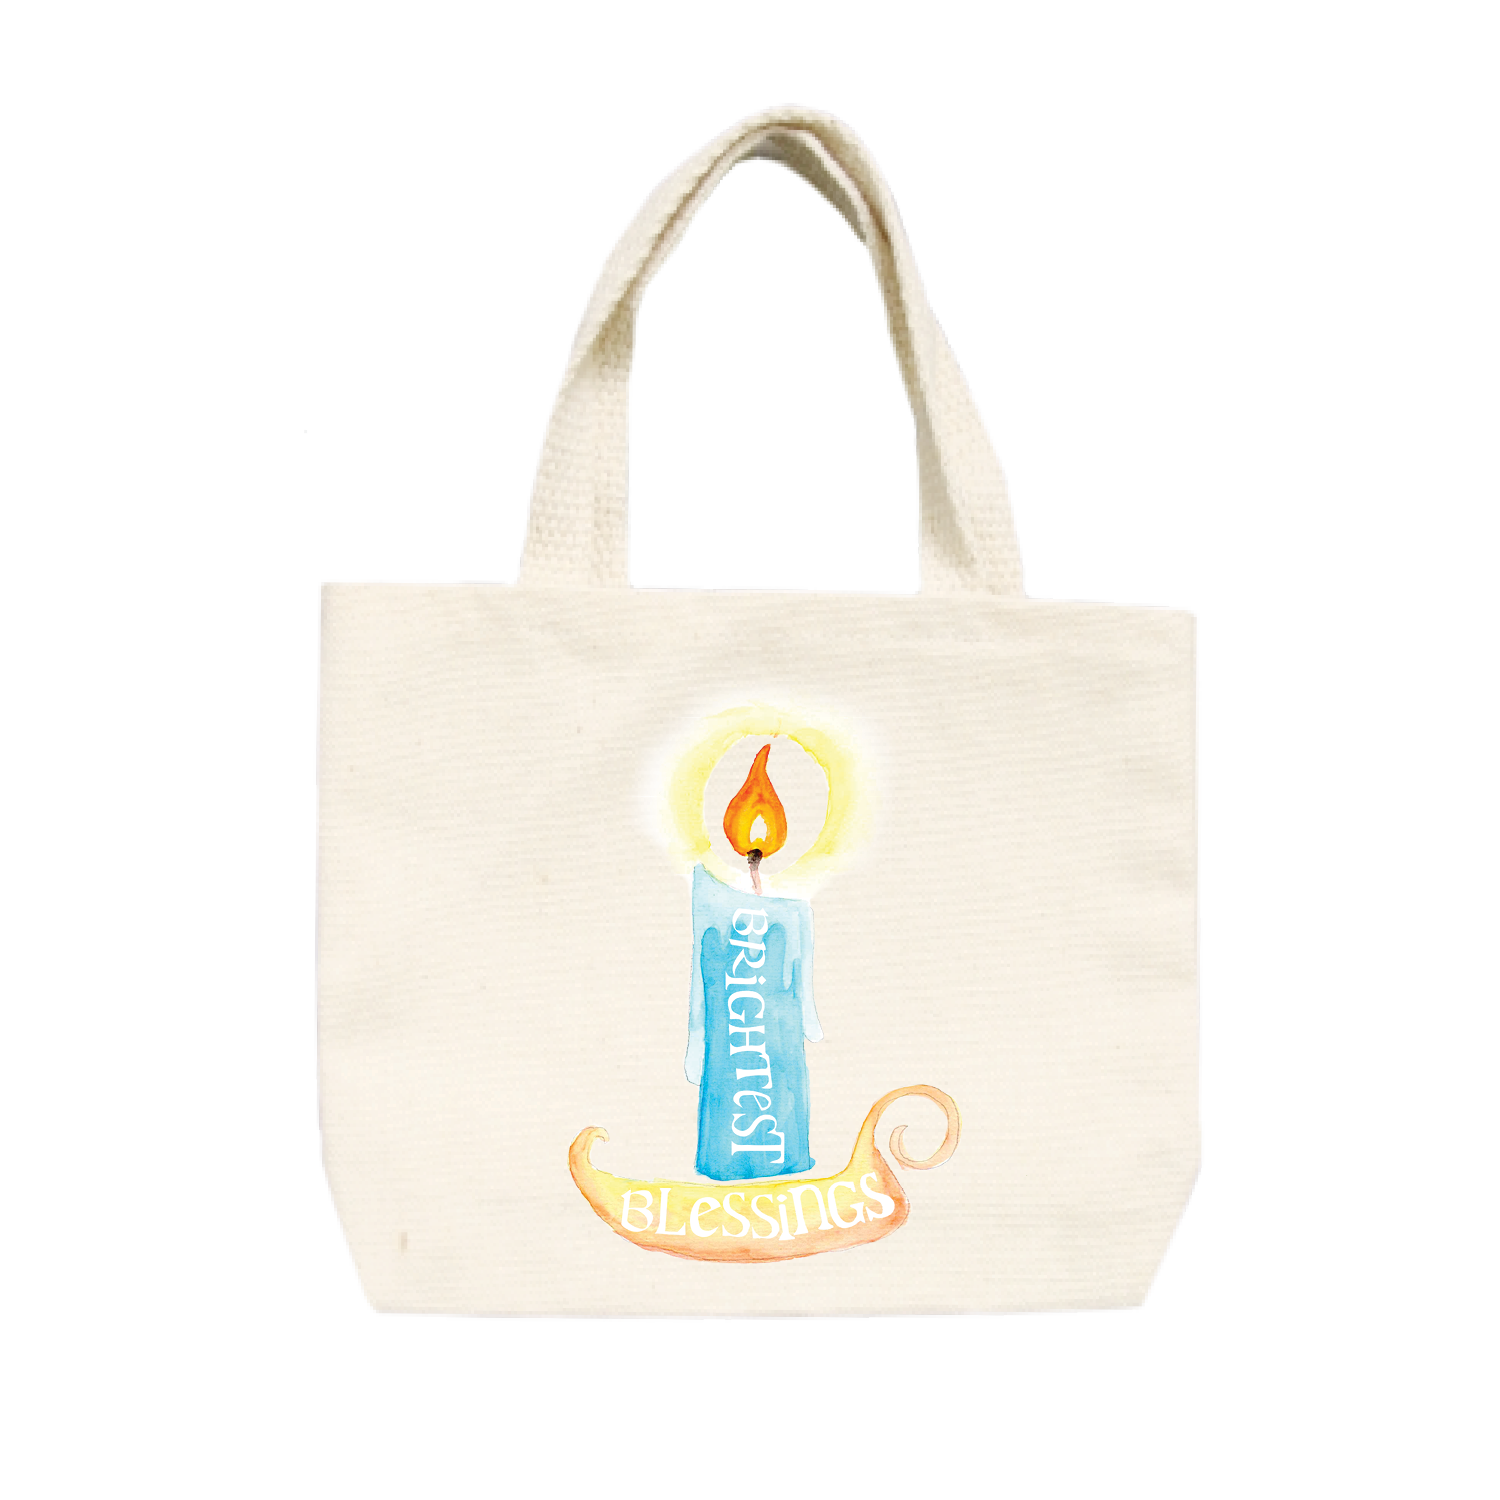 brightest blessings small tote